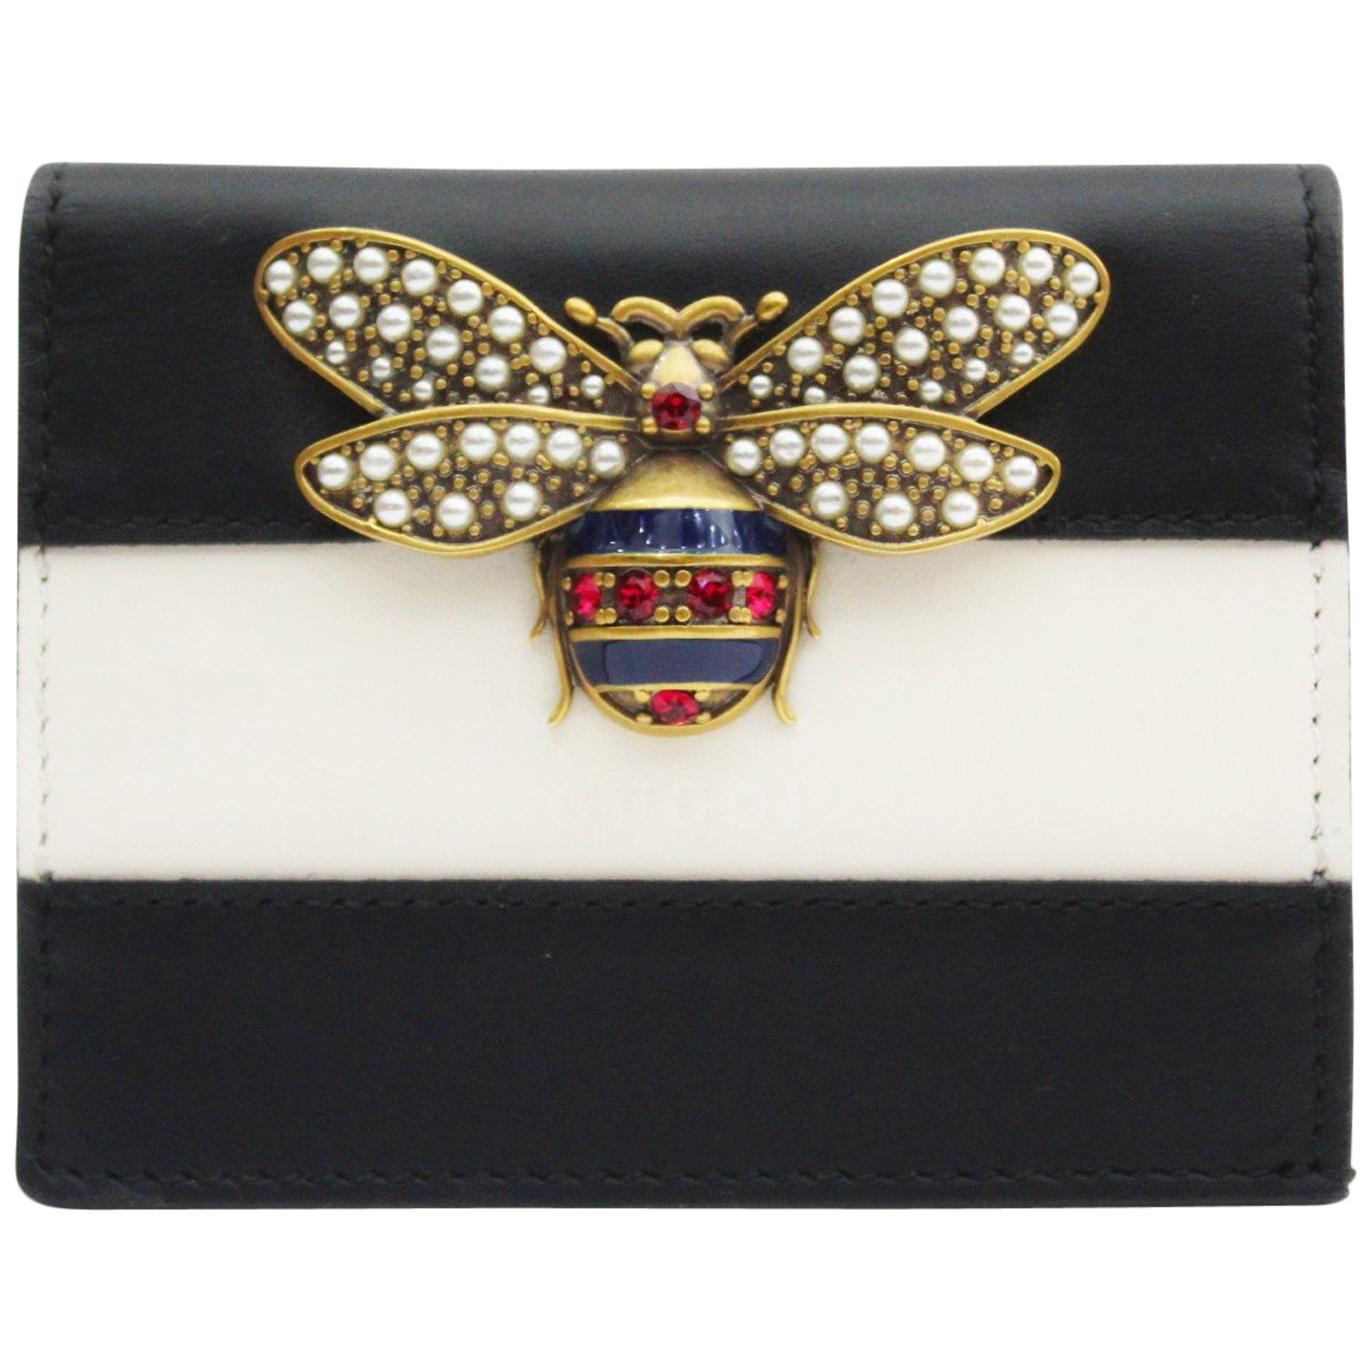 Gucci Queen Margaret leather card case, 2018